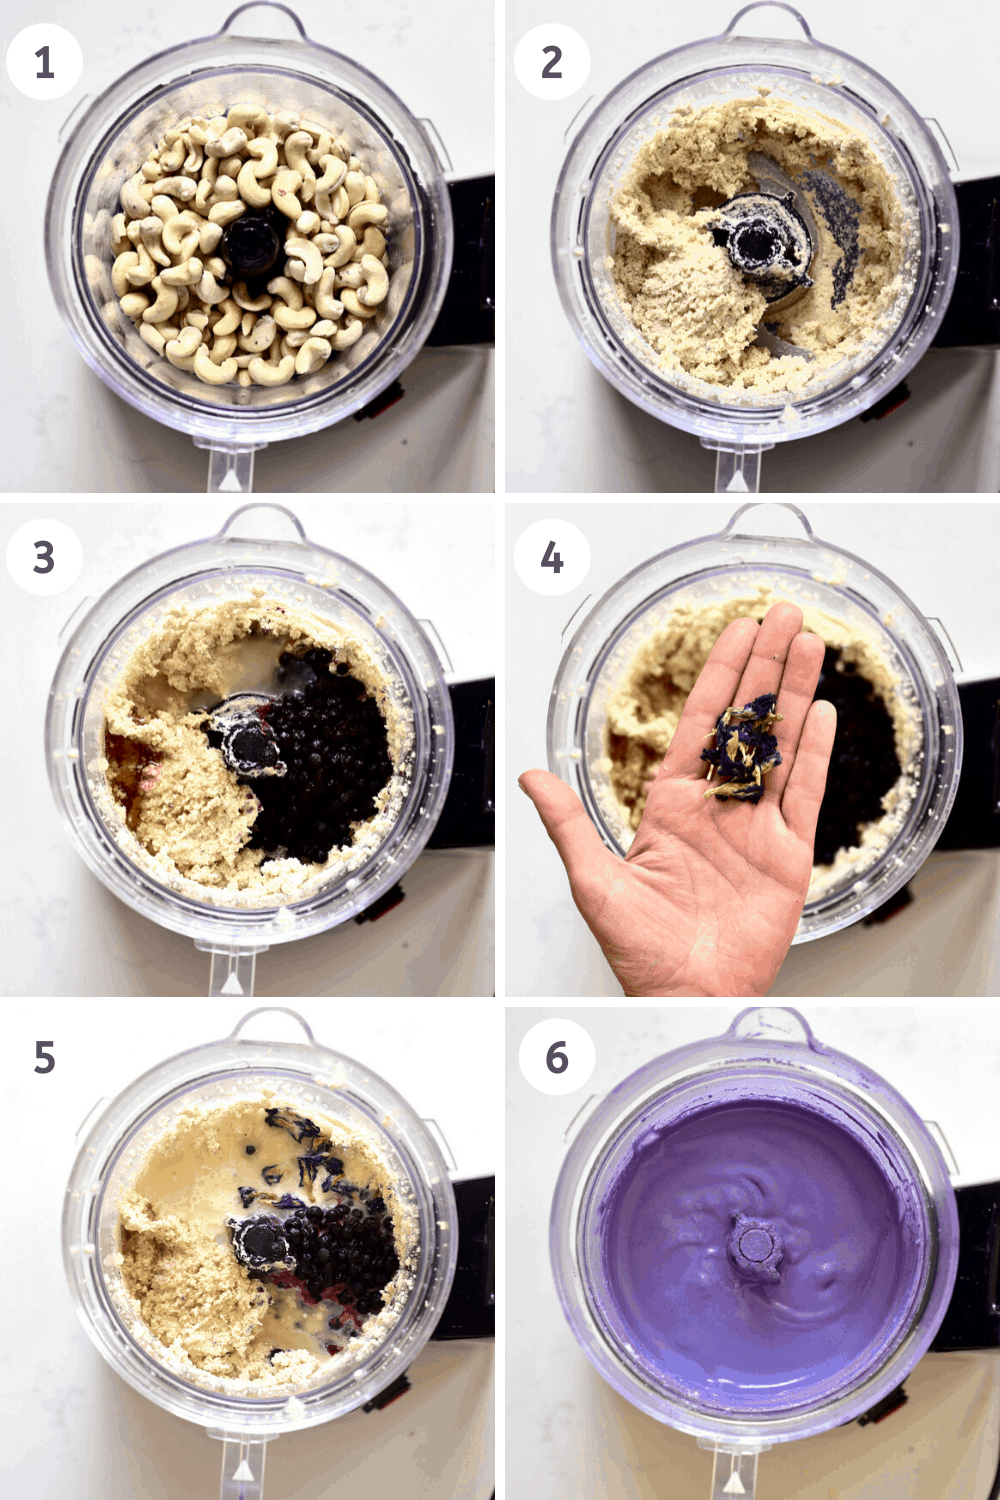 Steps to Making the filling